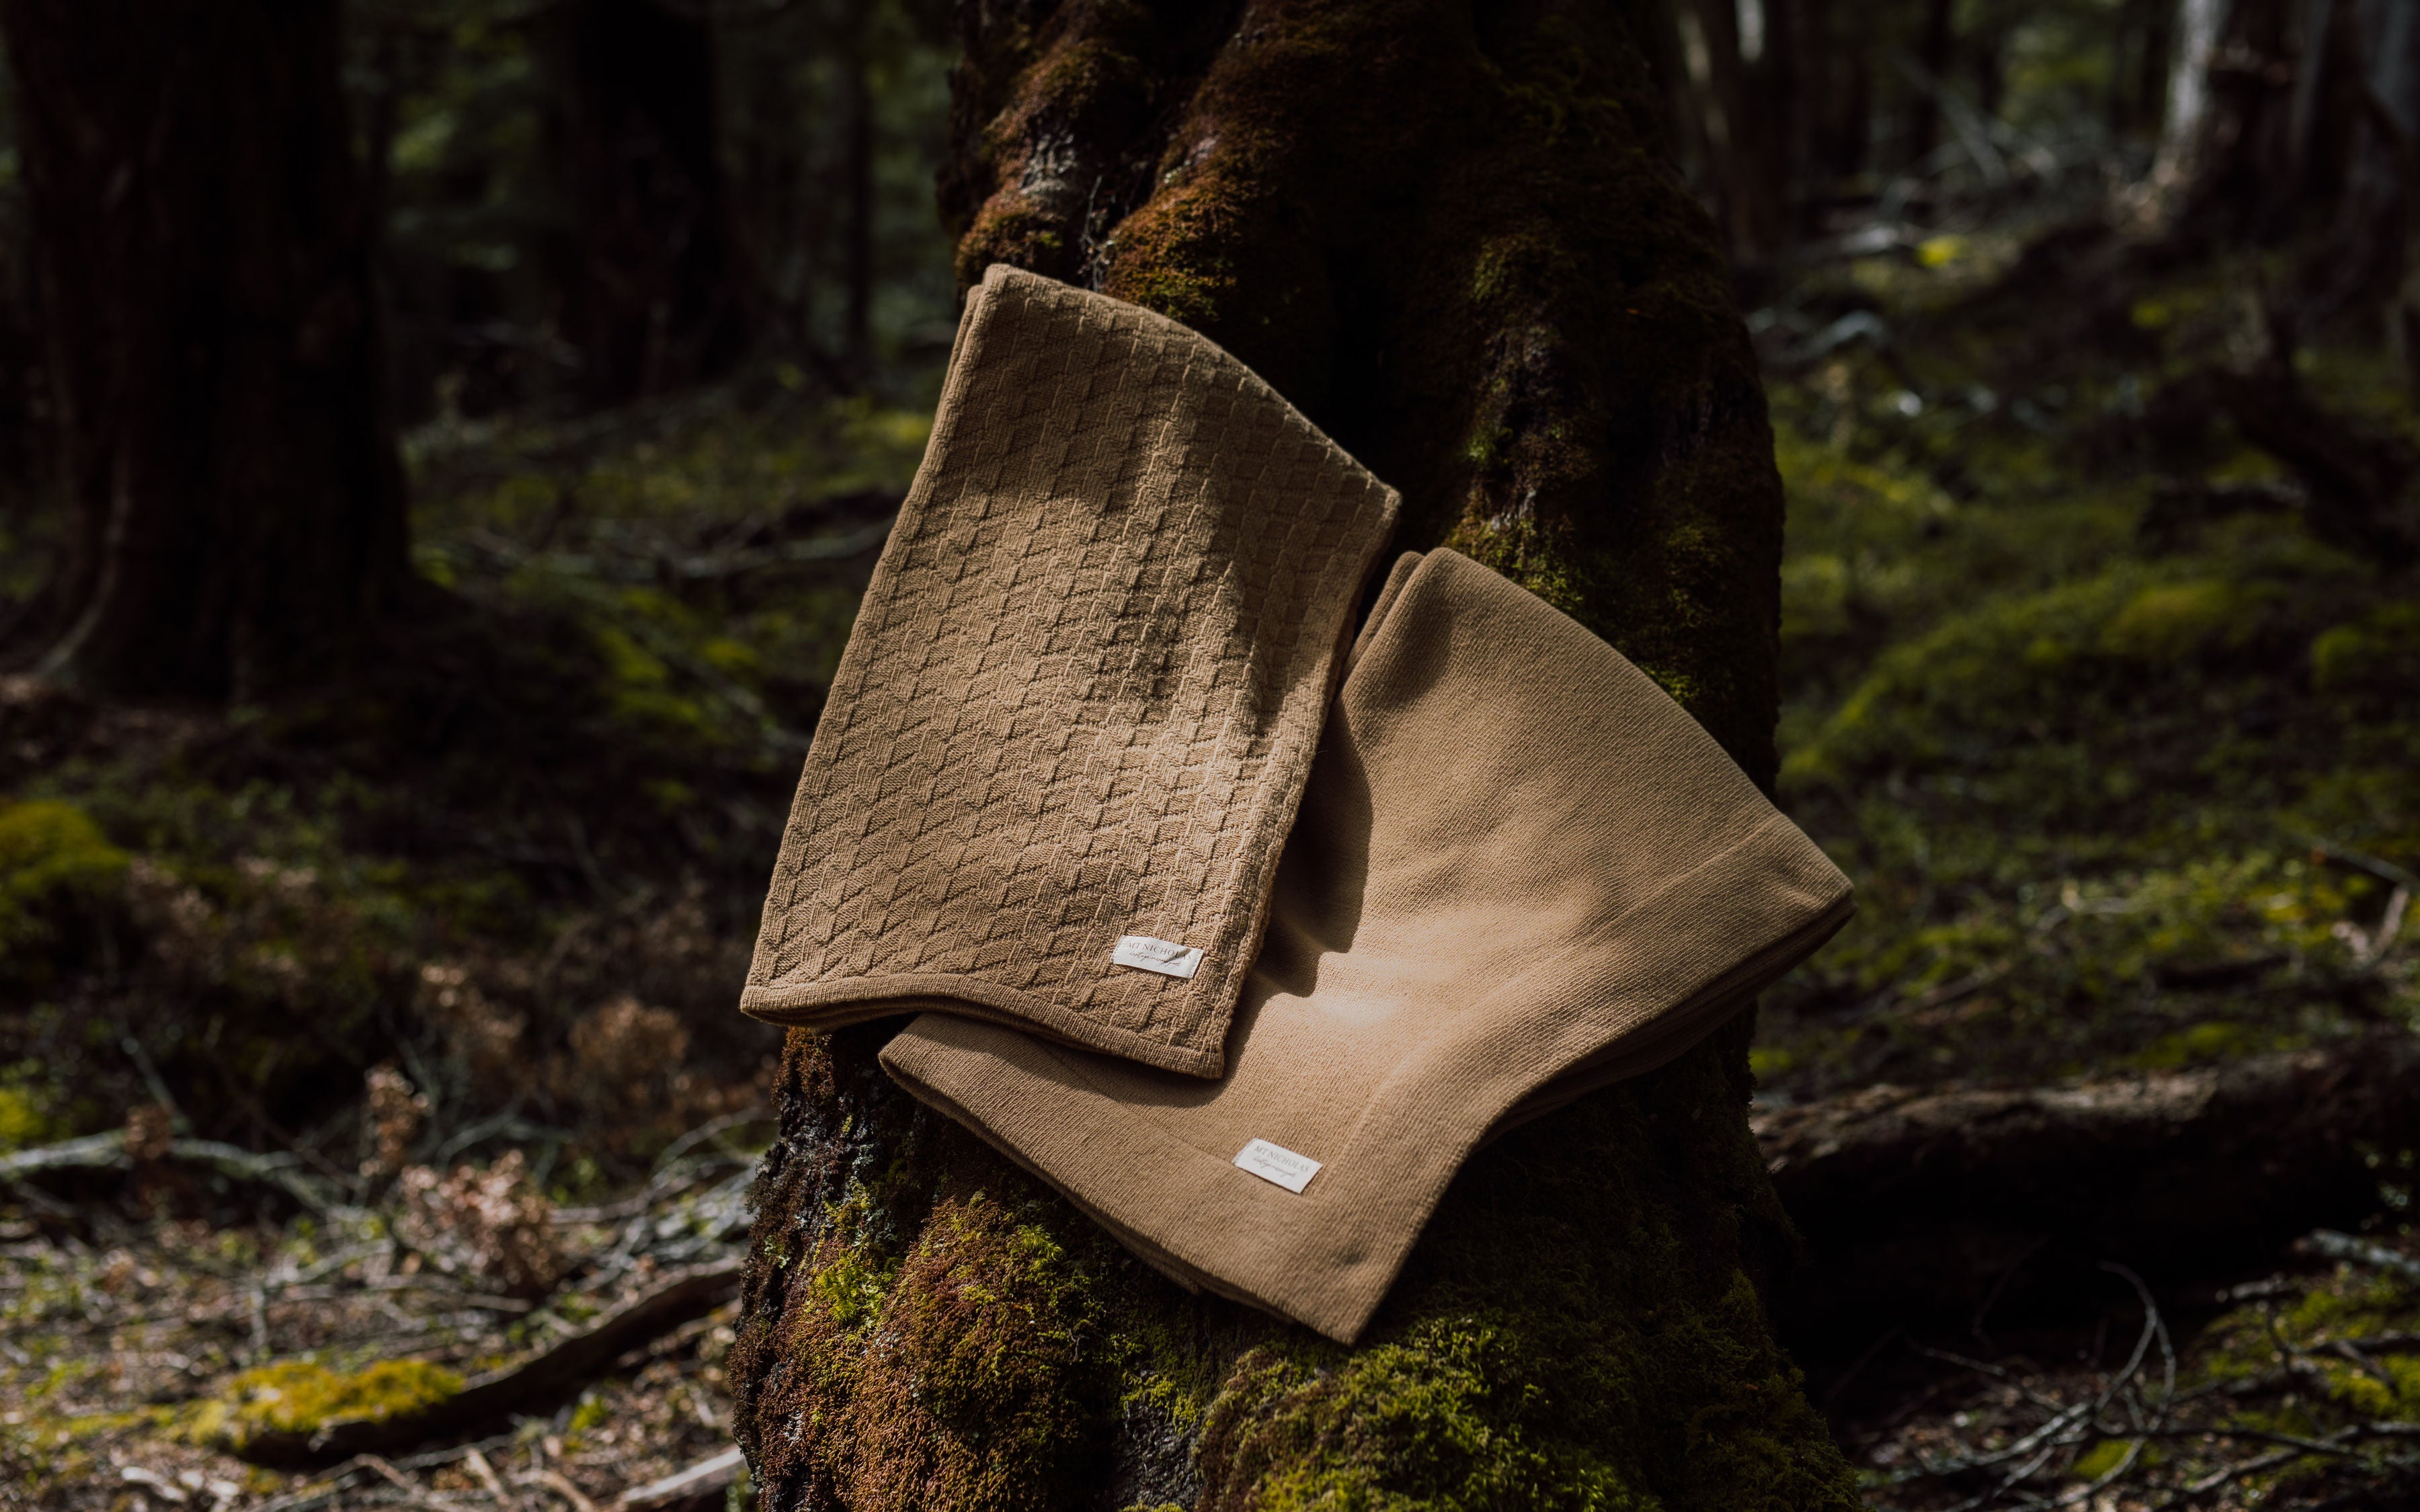 Two luxurious merino throw blankets draped over a tree trunk in the New Zealand forest.